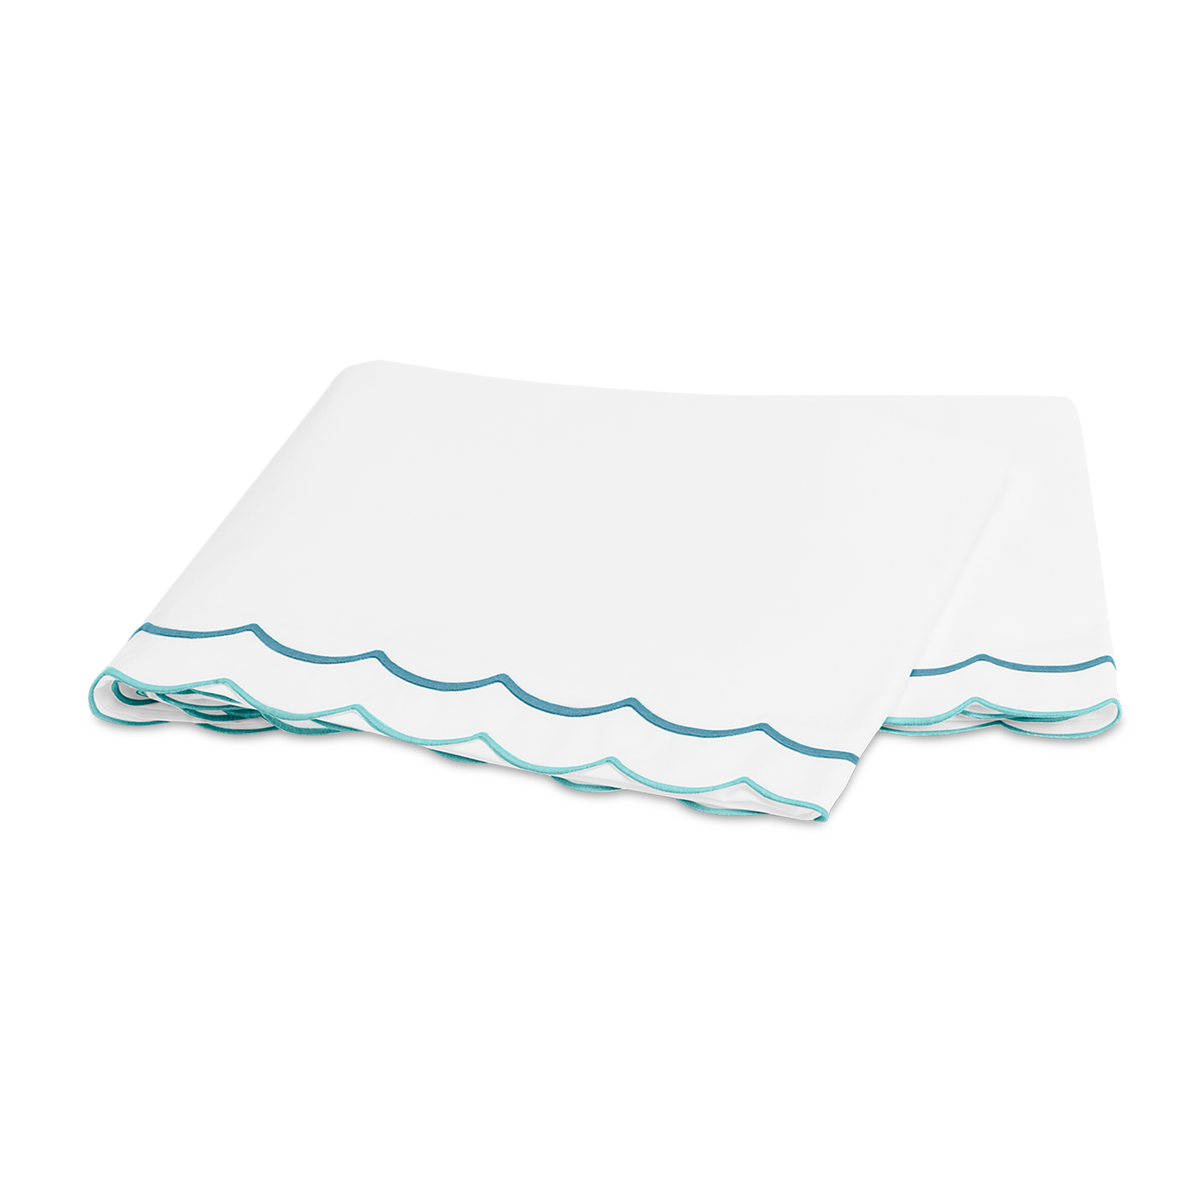 Flat Sheet of Matouk India Bedding in Cerulean Color